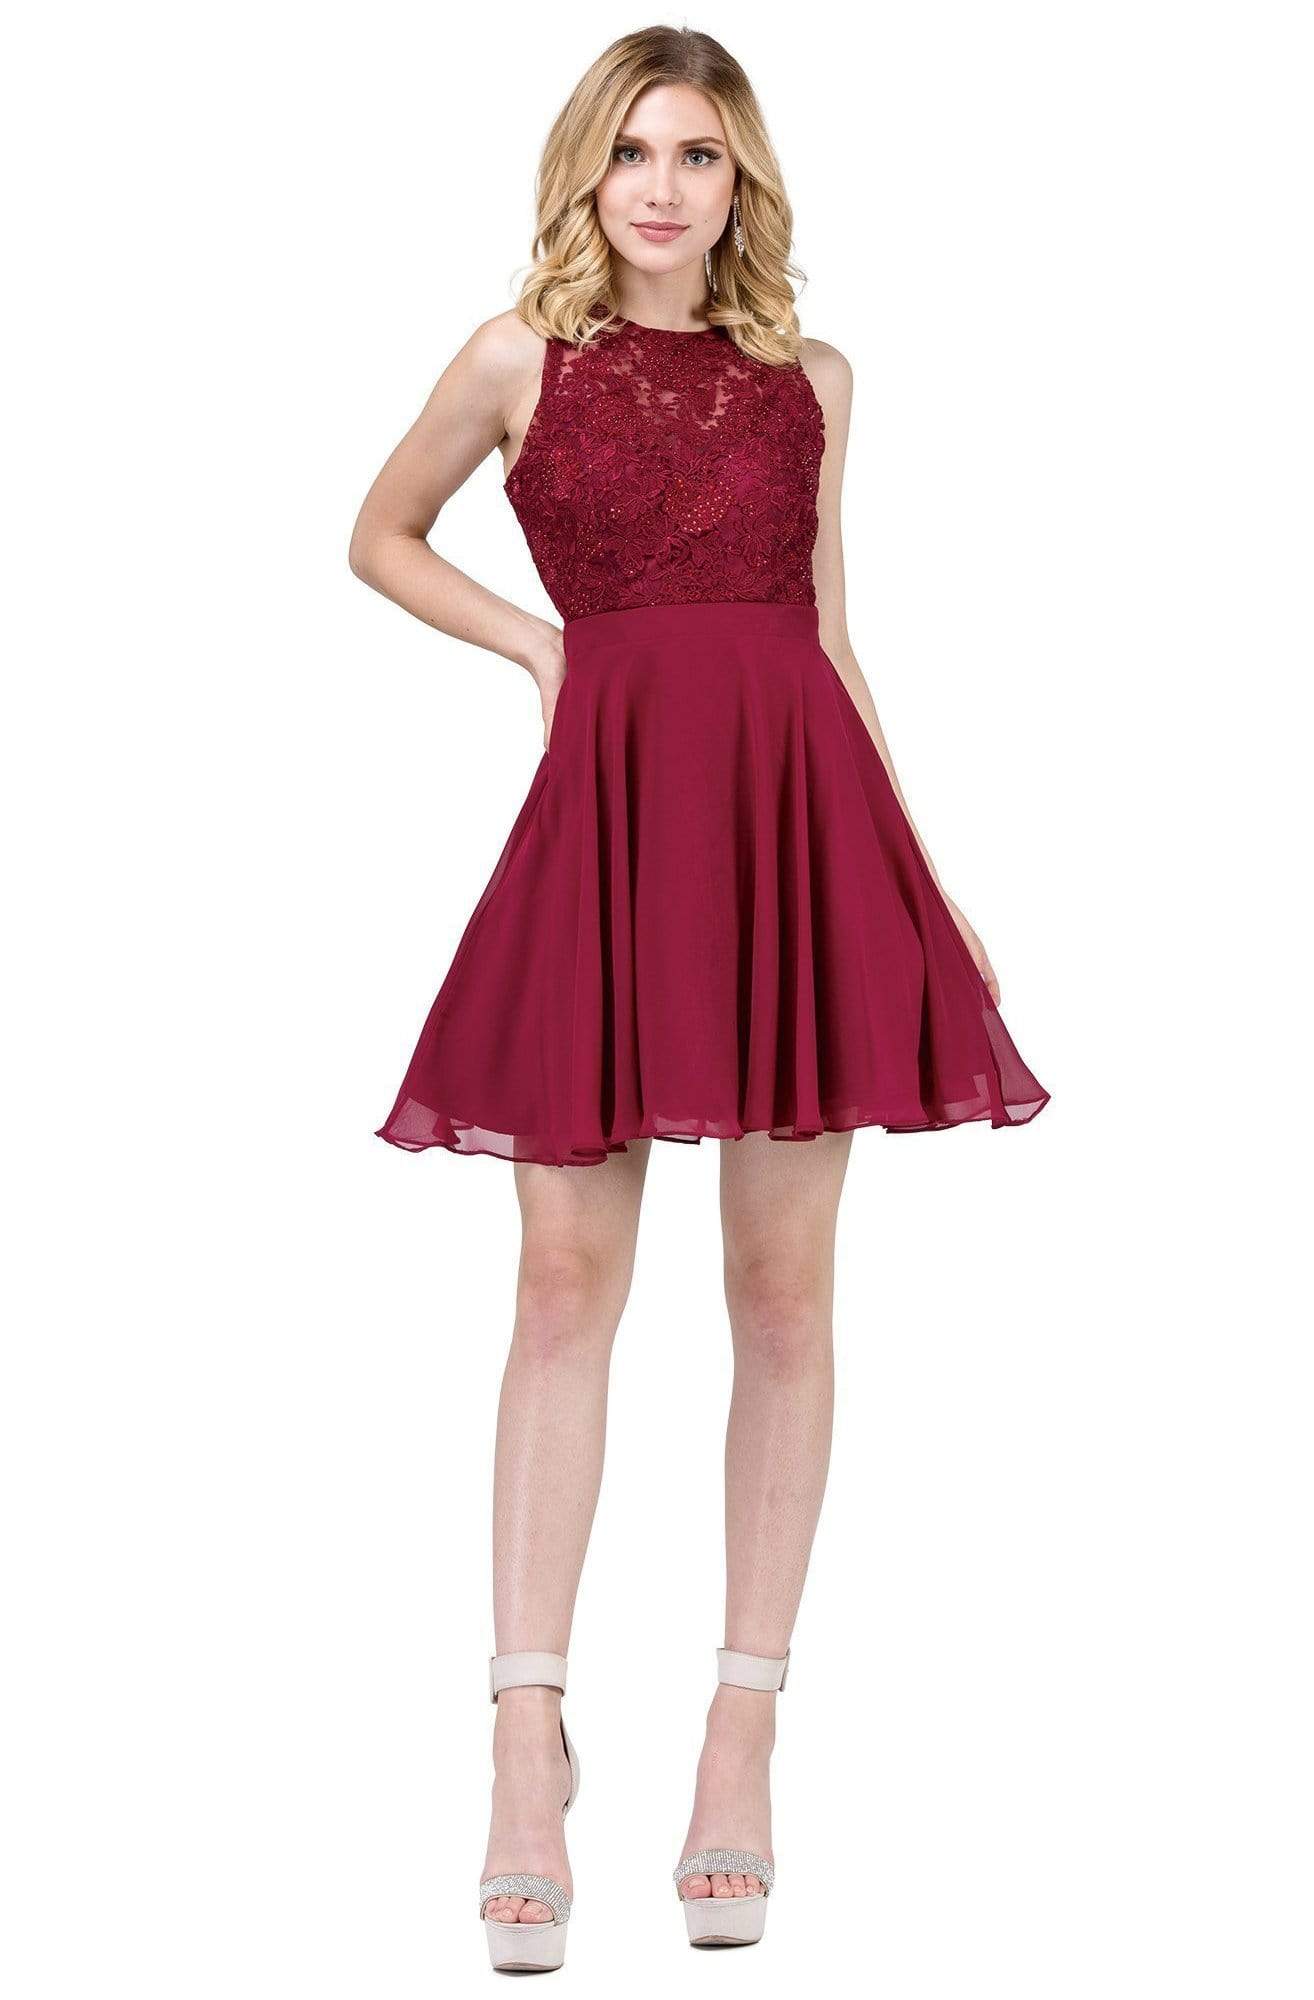 Image of Dancing Queen - 3012 Jeweled Floral Lace Bodice Homecoming Dress